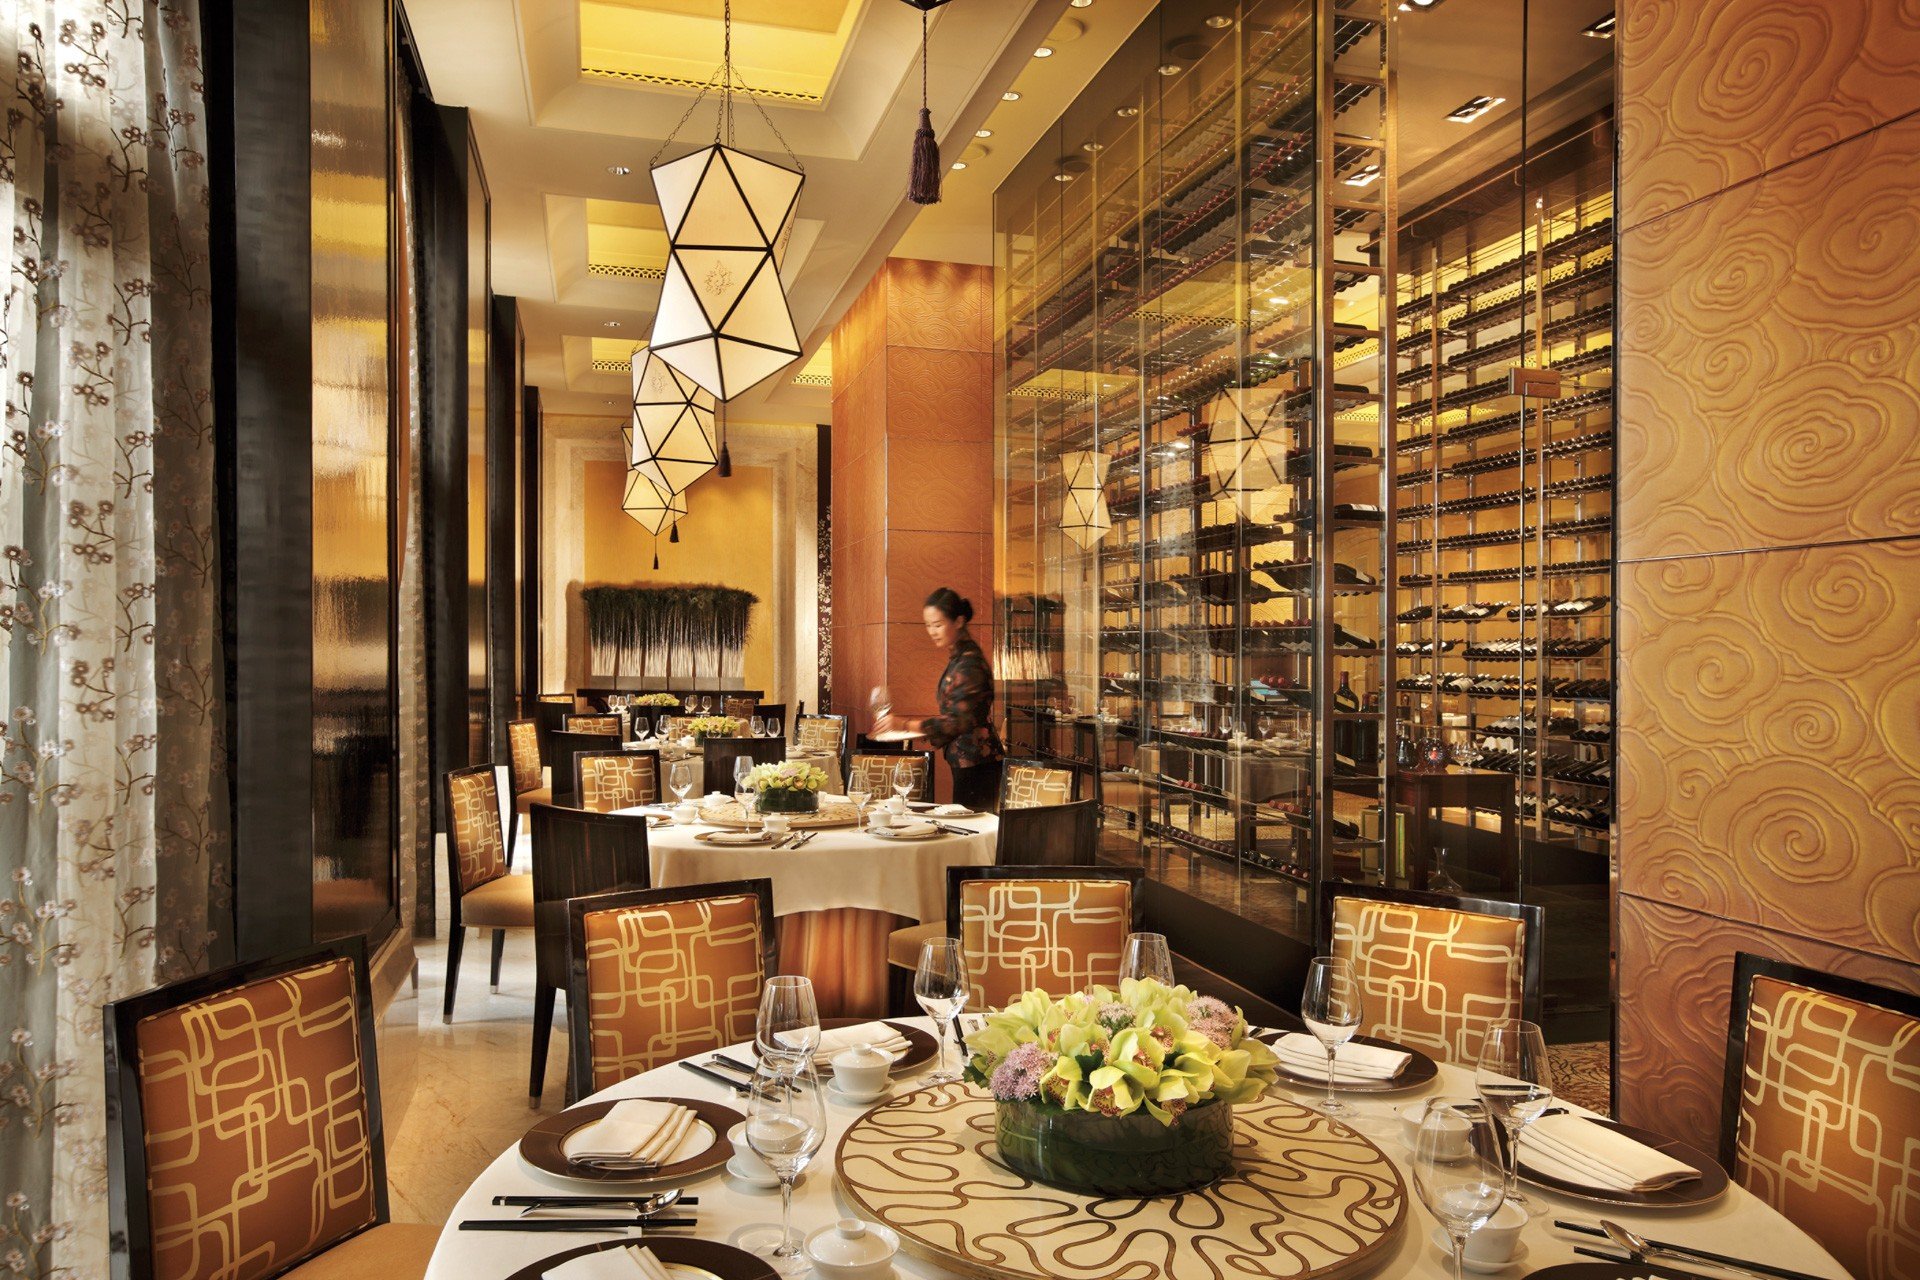 Zi Yat Heen is everything you’d expect of a Four Seasons restaurant. Photos: handouts